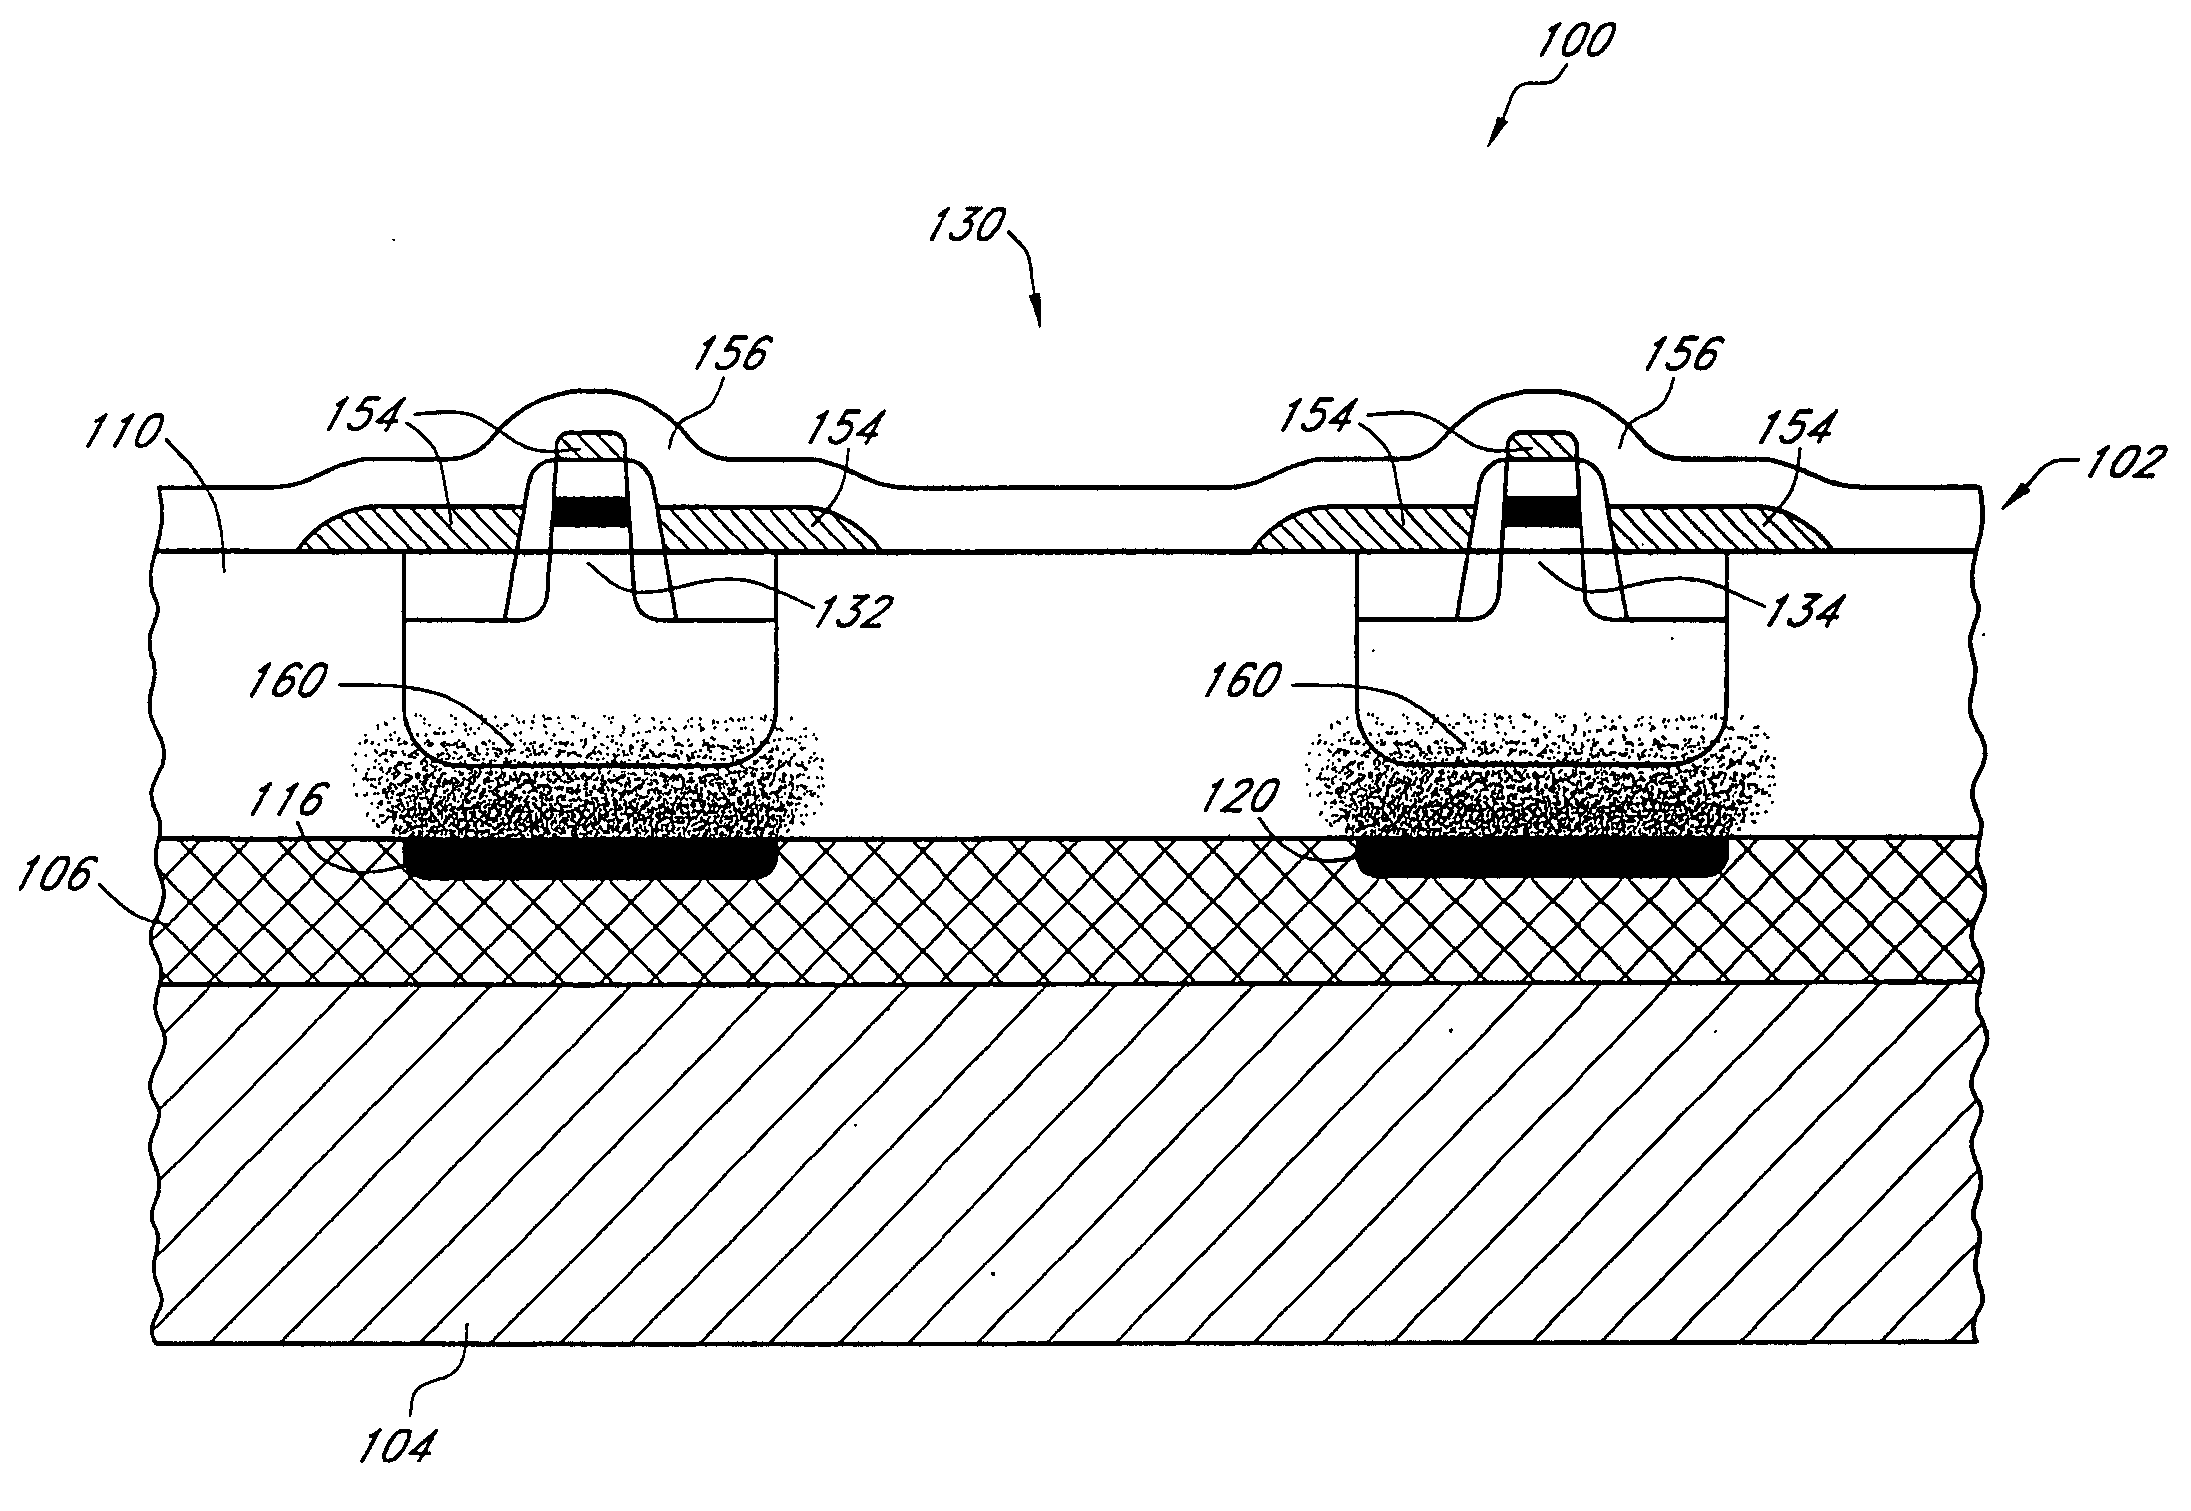 SOI device with reduced drain induced barrier lowering